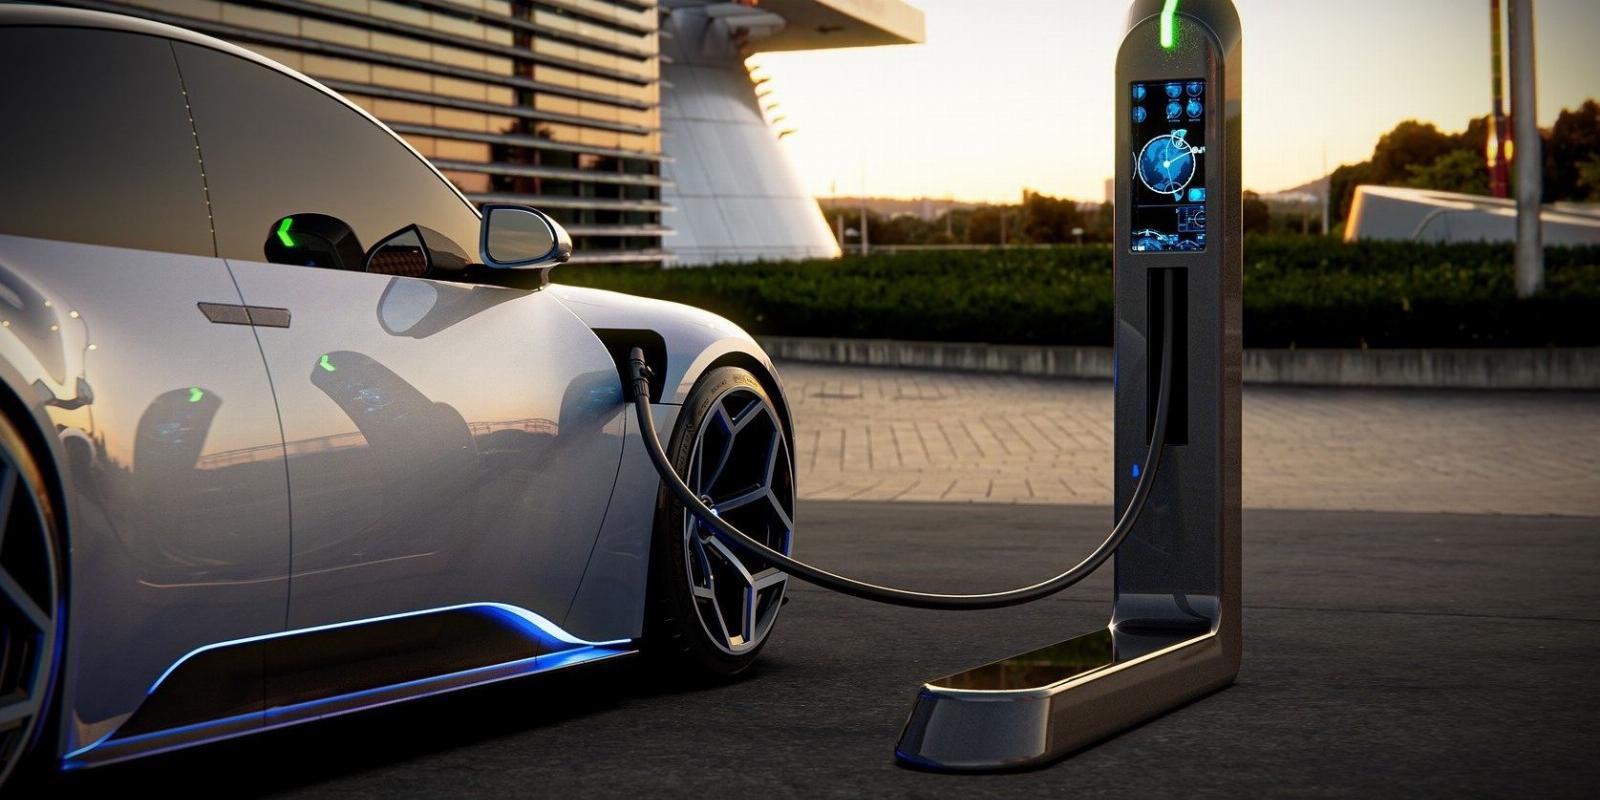 5 Ways to Speed Up Your Next EV Purchase